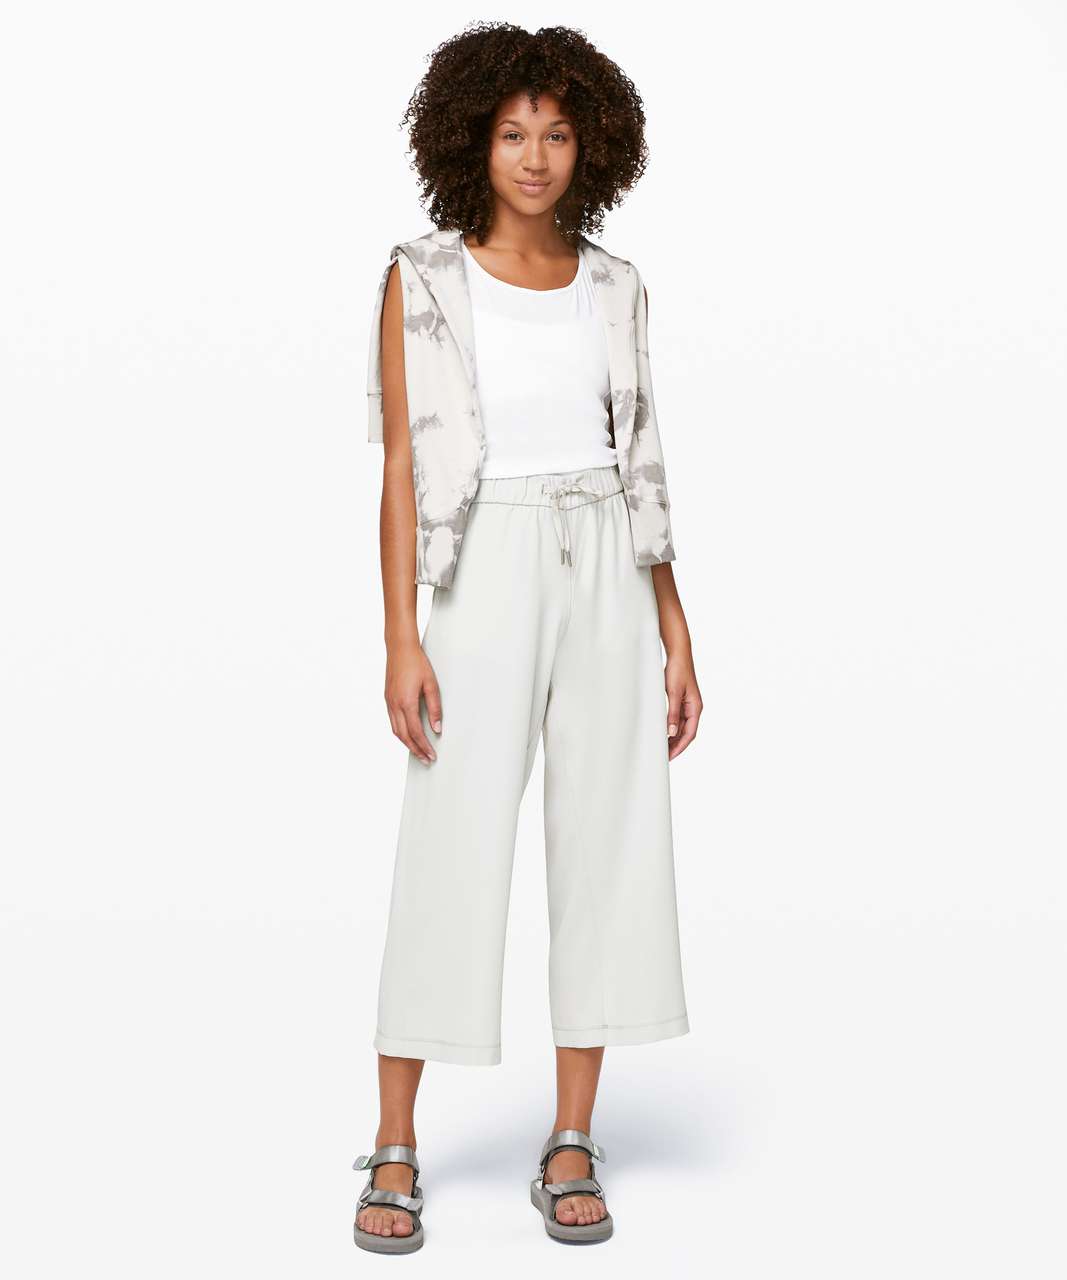 Lululemon On the Fly Wide Leg Pants Size 0 - $44 (62% Off Retail) - From  maddy